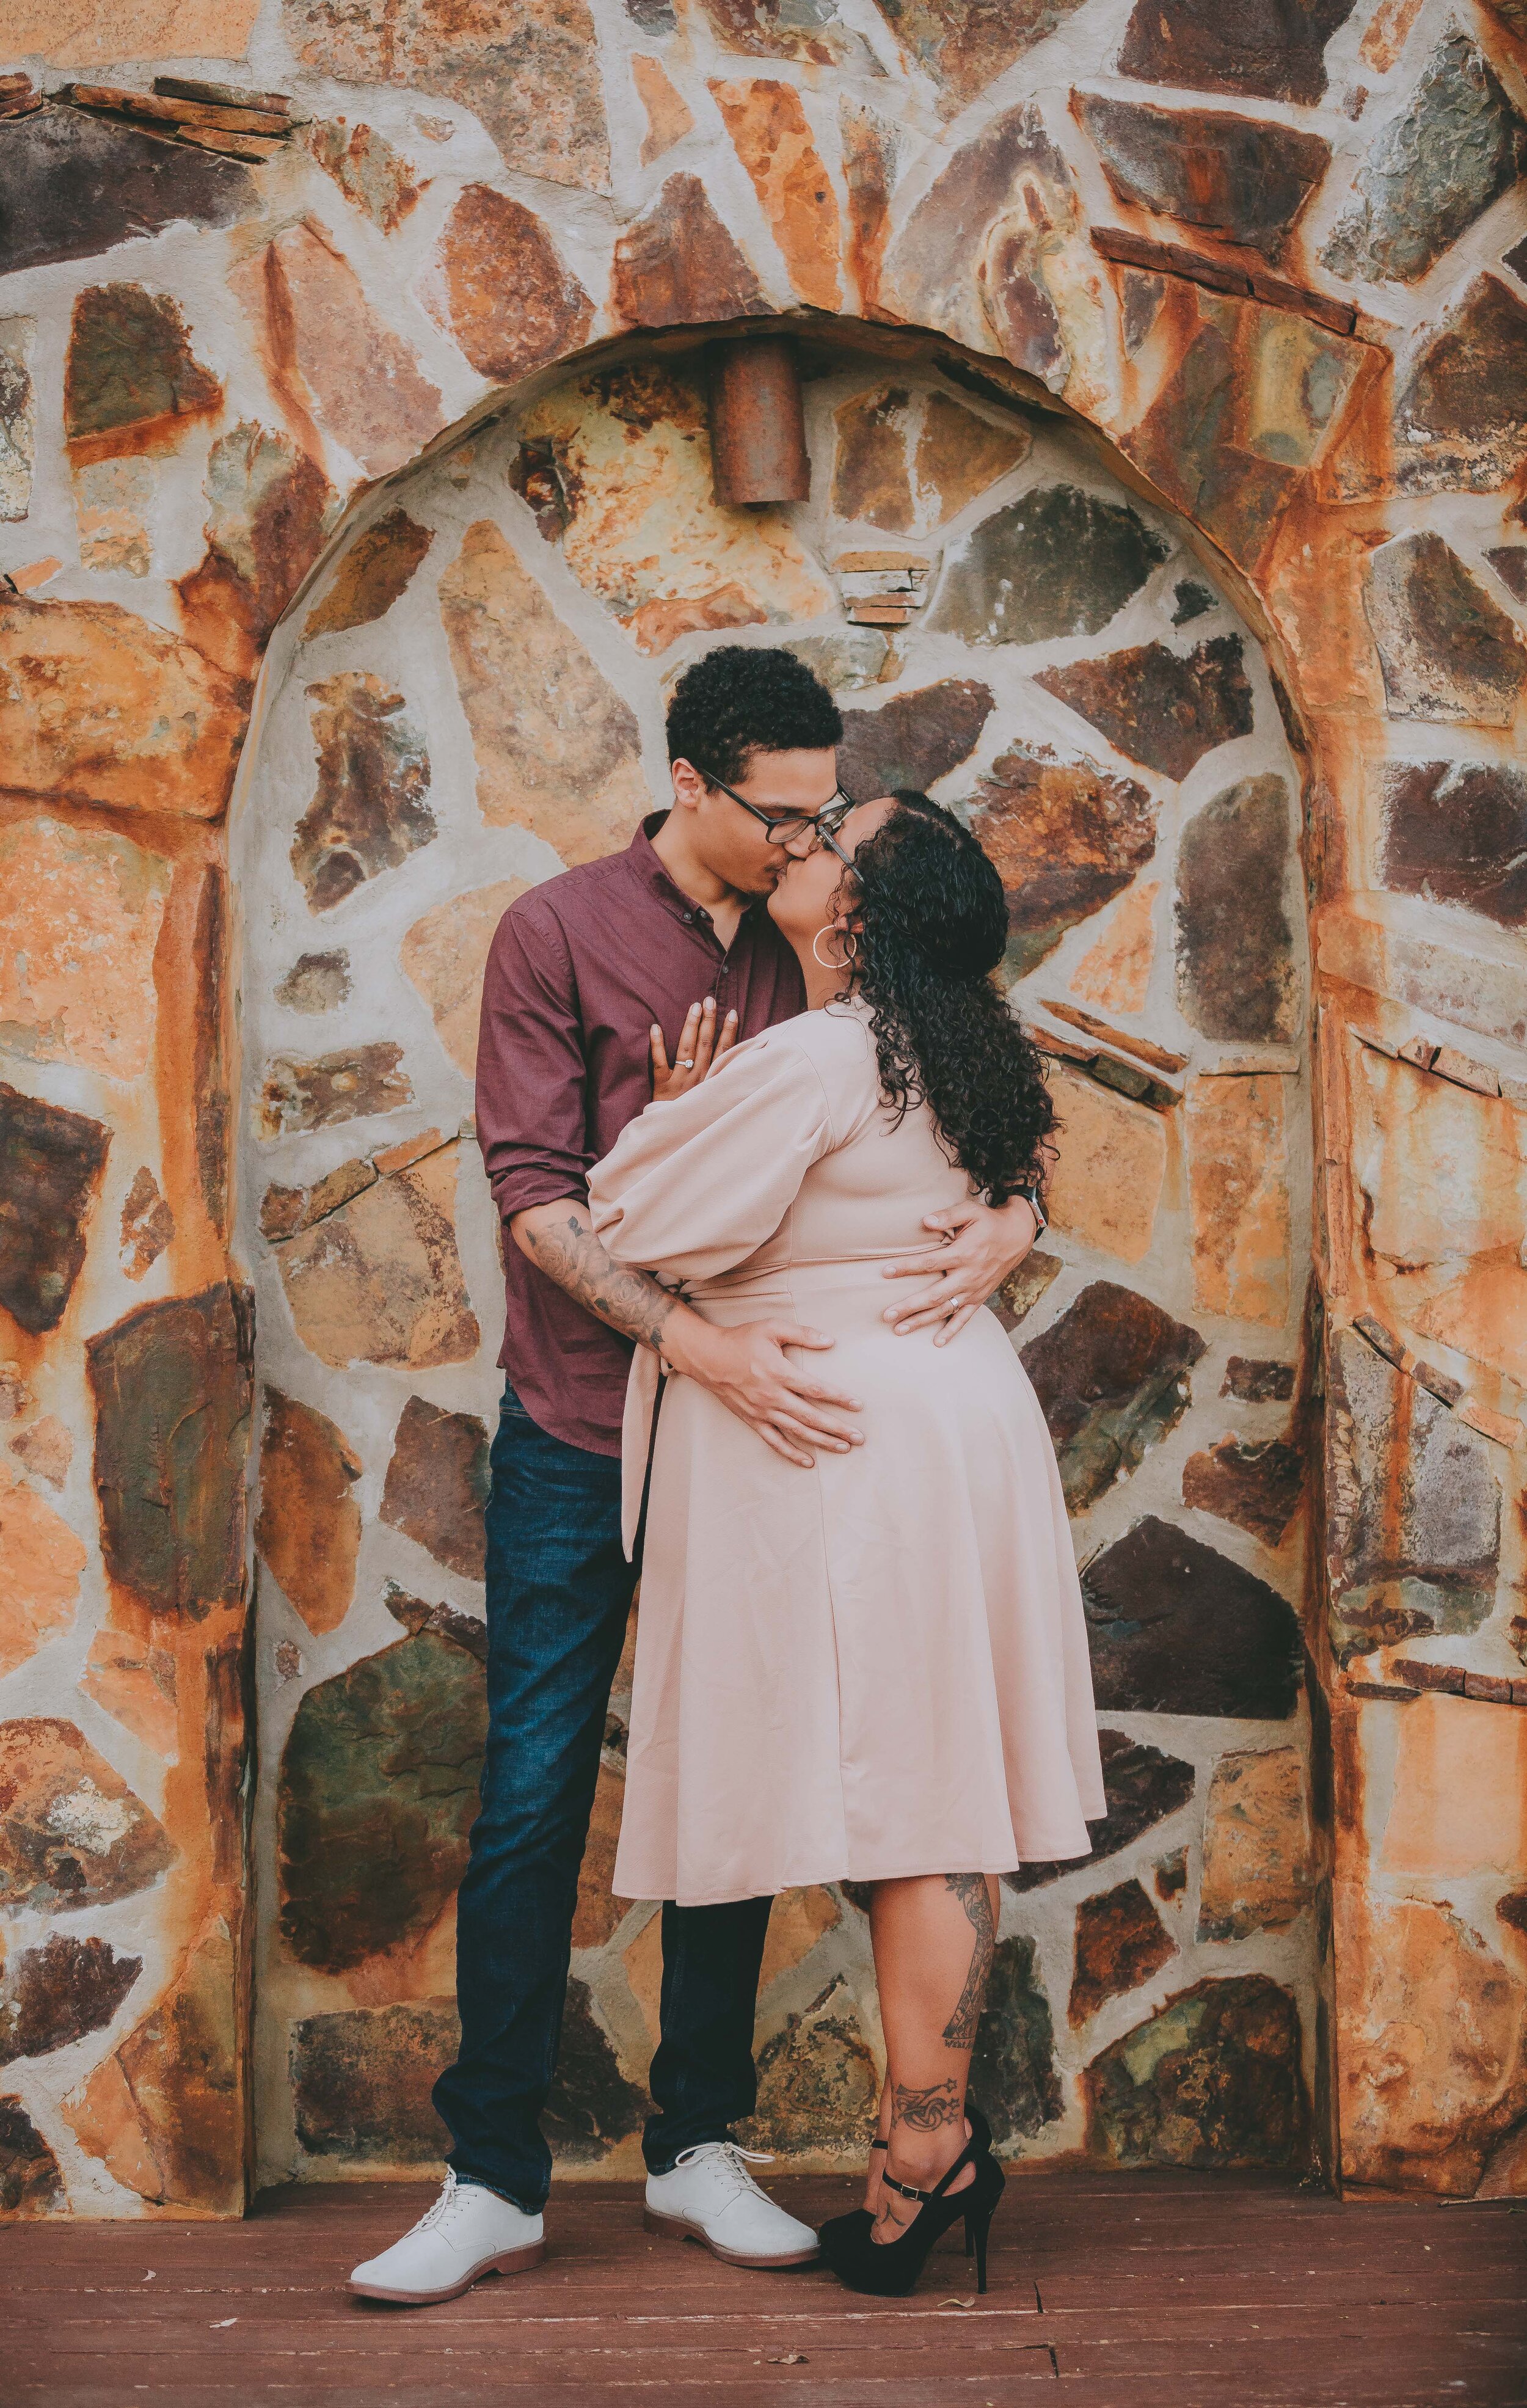 Fresno Engagament Photos - Wolf Lakes - The Clausen Gallery - Aleksis and Scott -12.jpg